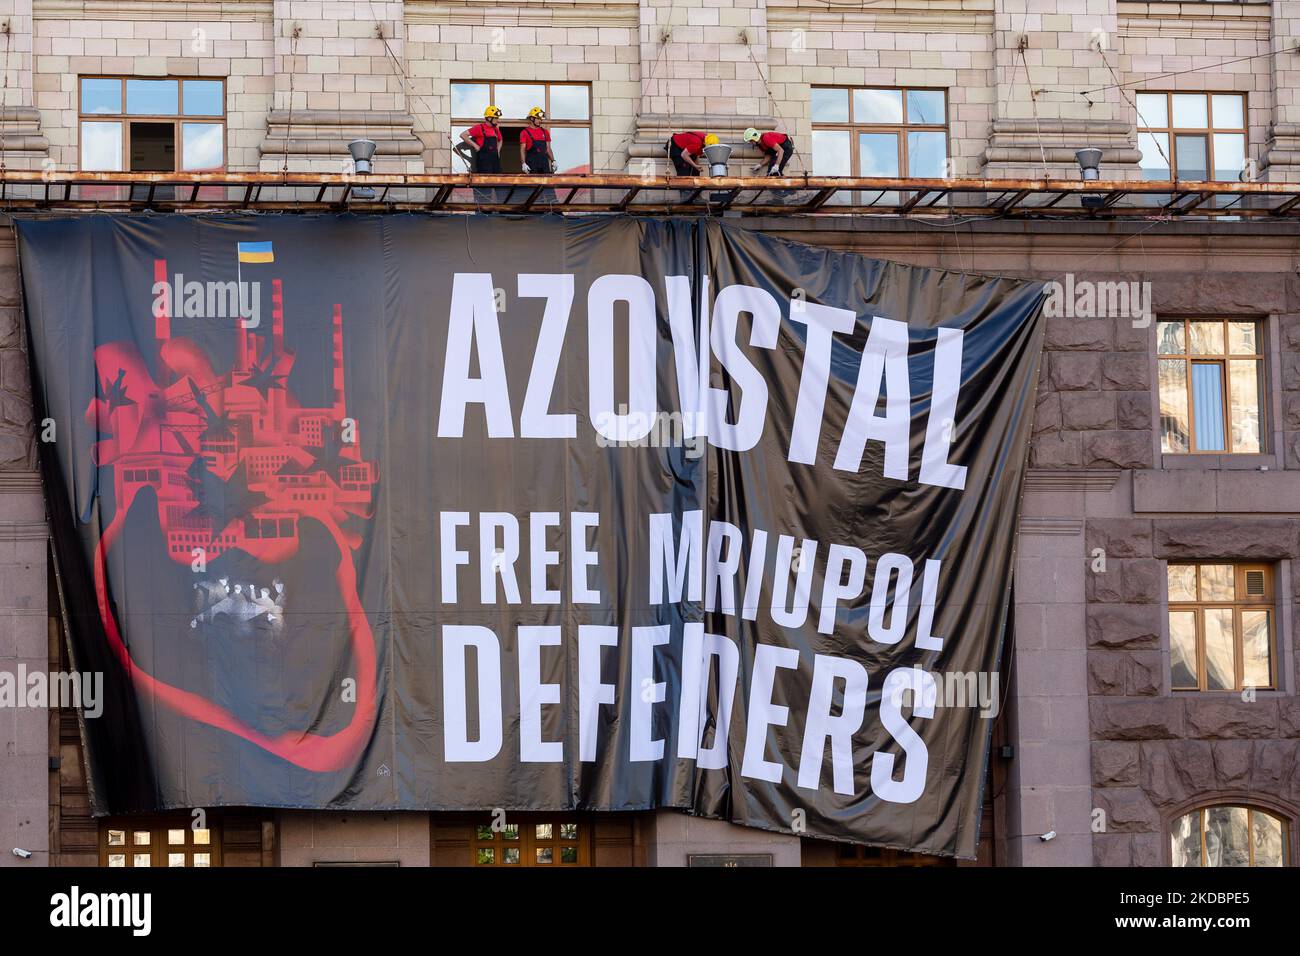 A large billboard with a sign 'Azovstal. Free Mariupol Defenders' is being hanged on a City Council building in an Old Town of Kyiv, Ukraine on June 8, 2022. As the Russian Federation invaded Ukraine 3 and a half months ago, fierce fighting continues in the East of the country. The capital, Kyiv stays in relative safety, though reminders of the war such as protective sand bags, road blocks, national and anti-war symbols are present all over the city. (Photo by Dominika Zarzycka/NurPhoto) Stock Photo